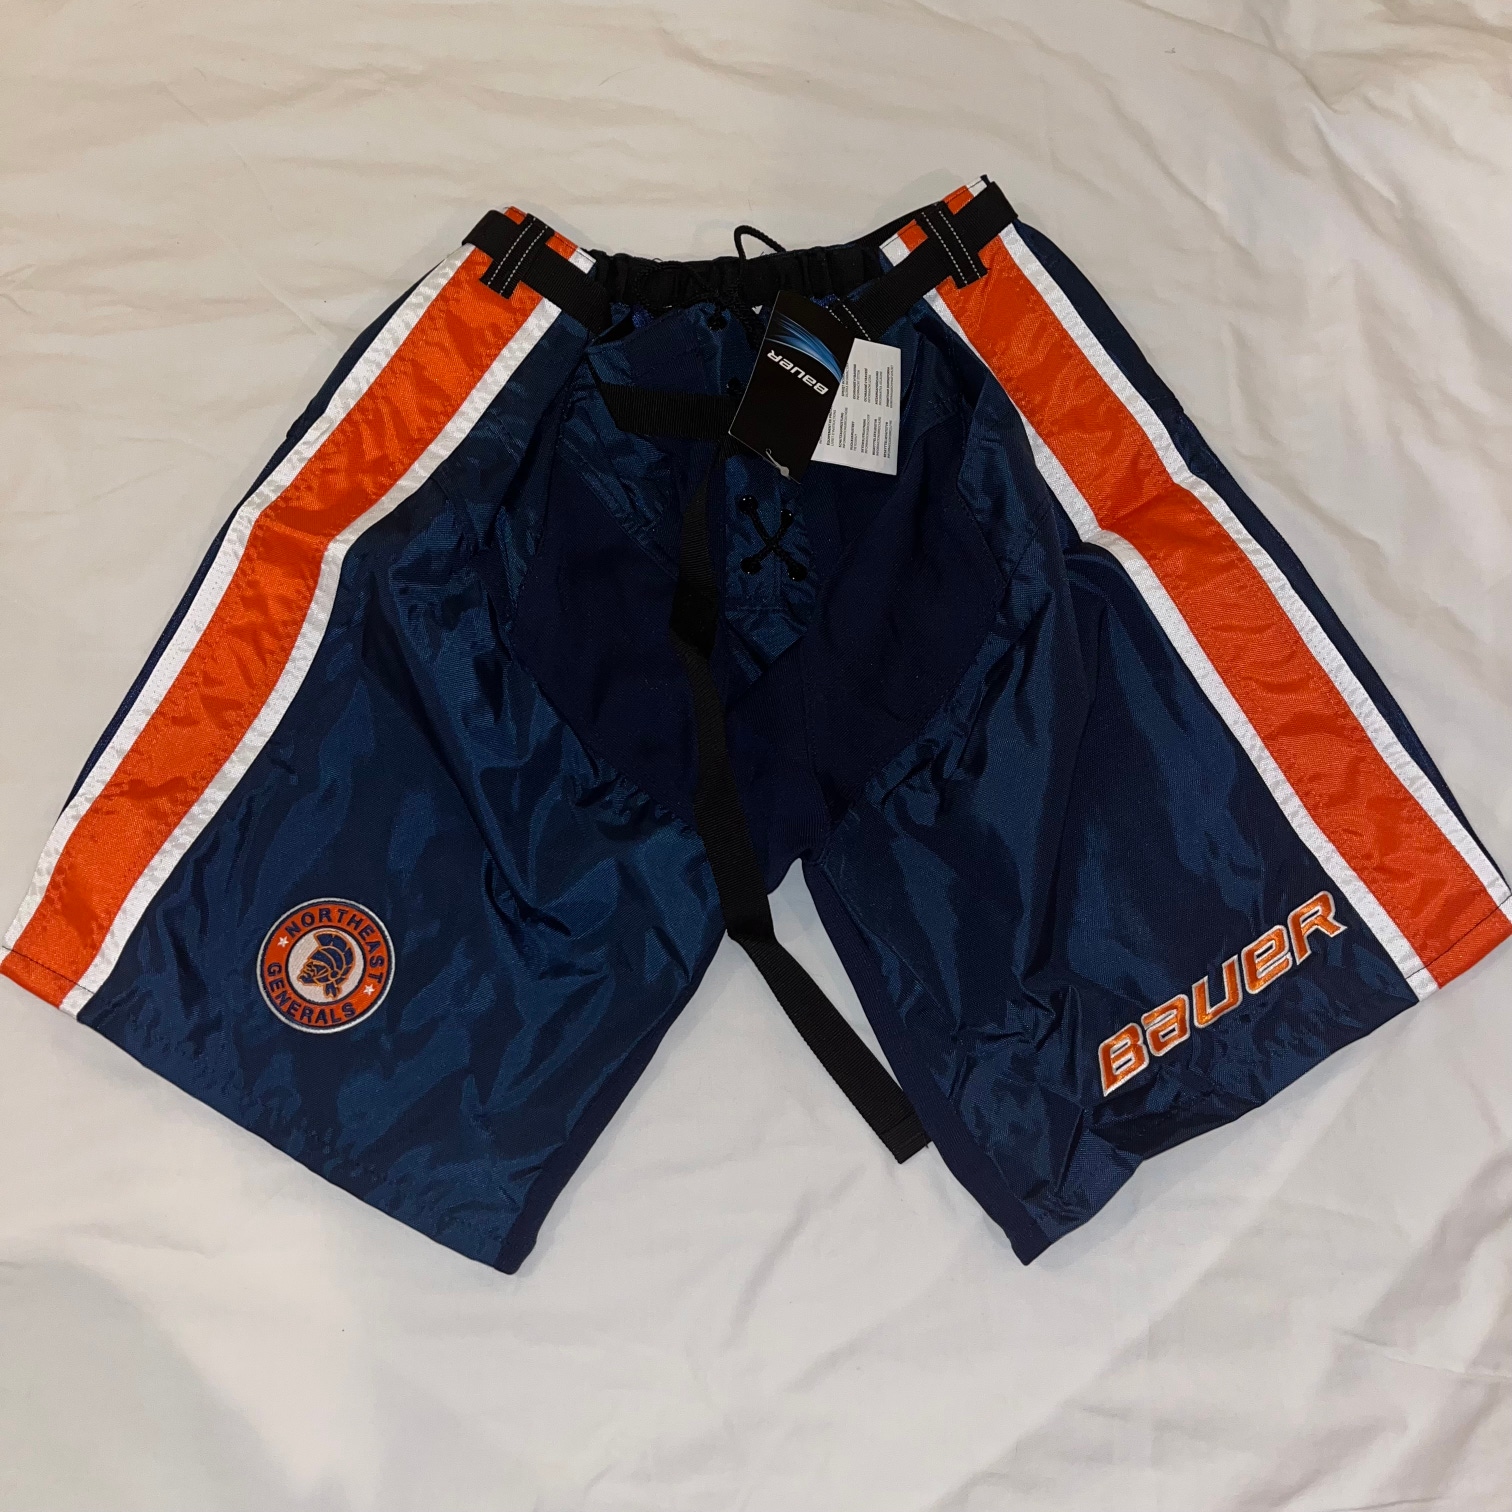 New Large Bauer Pant Shell - Blue with Orange/White